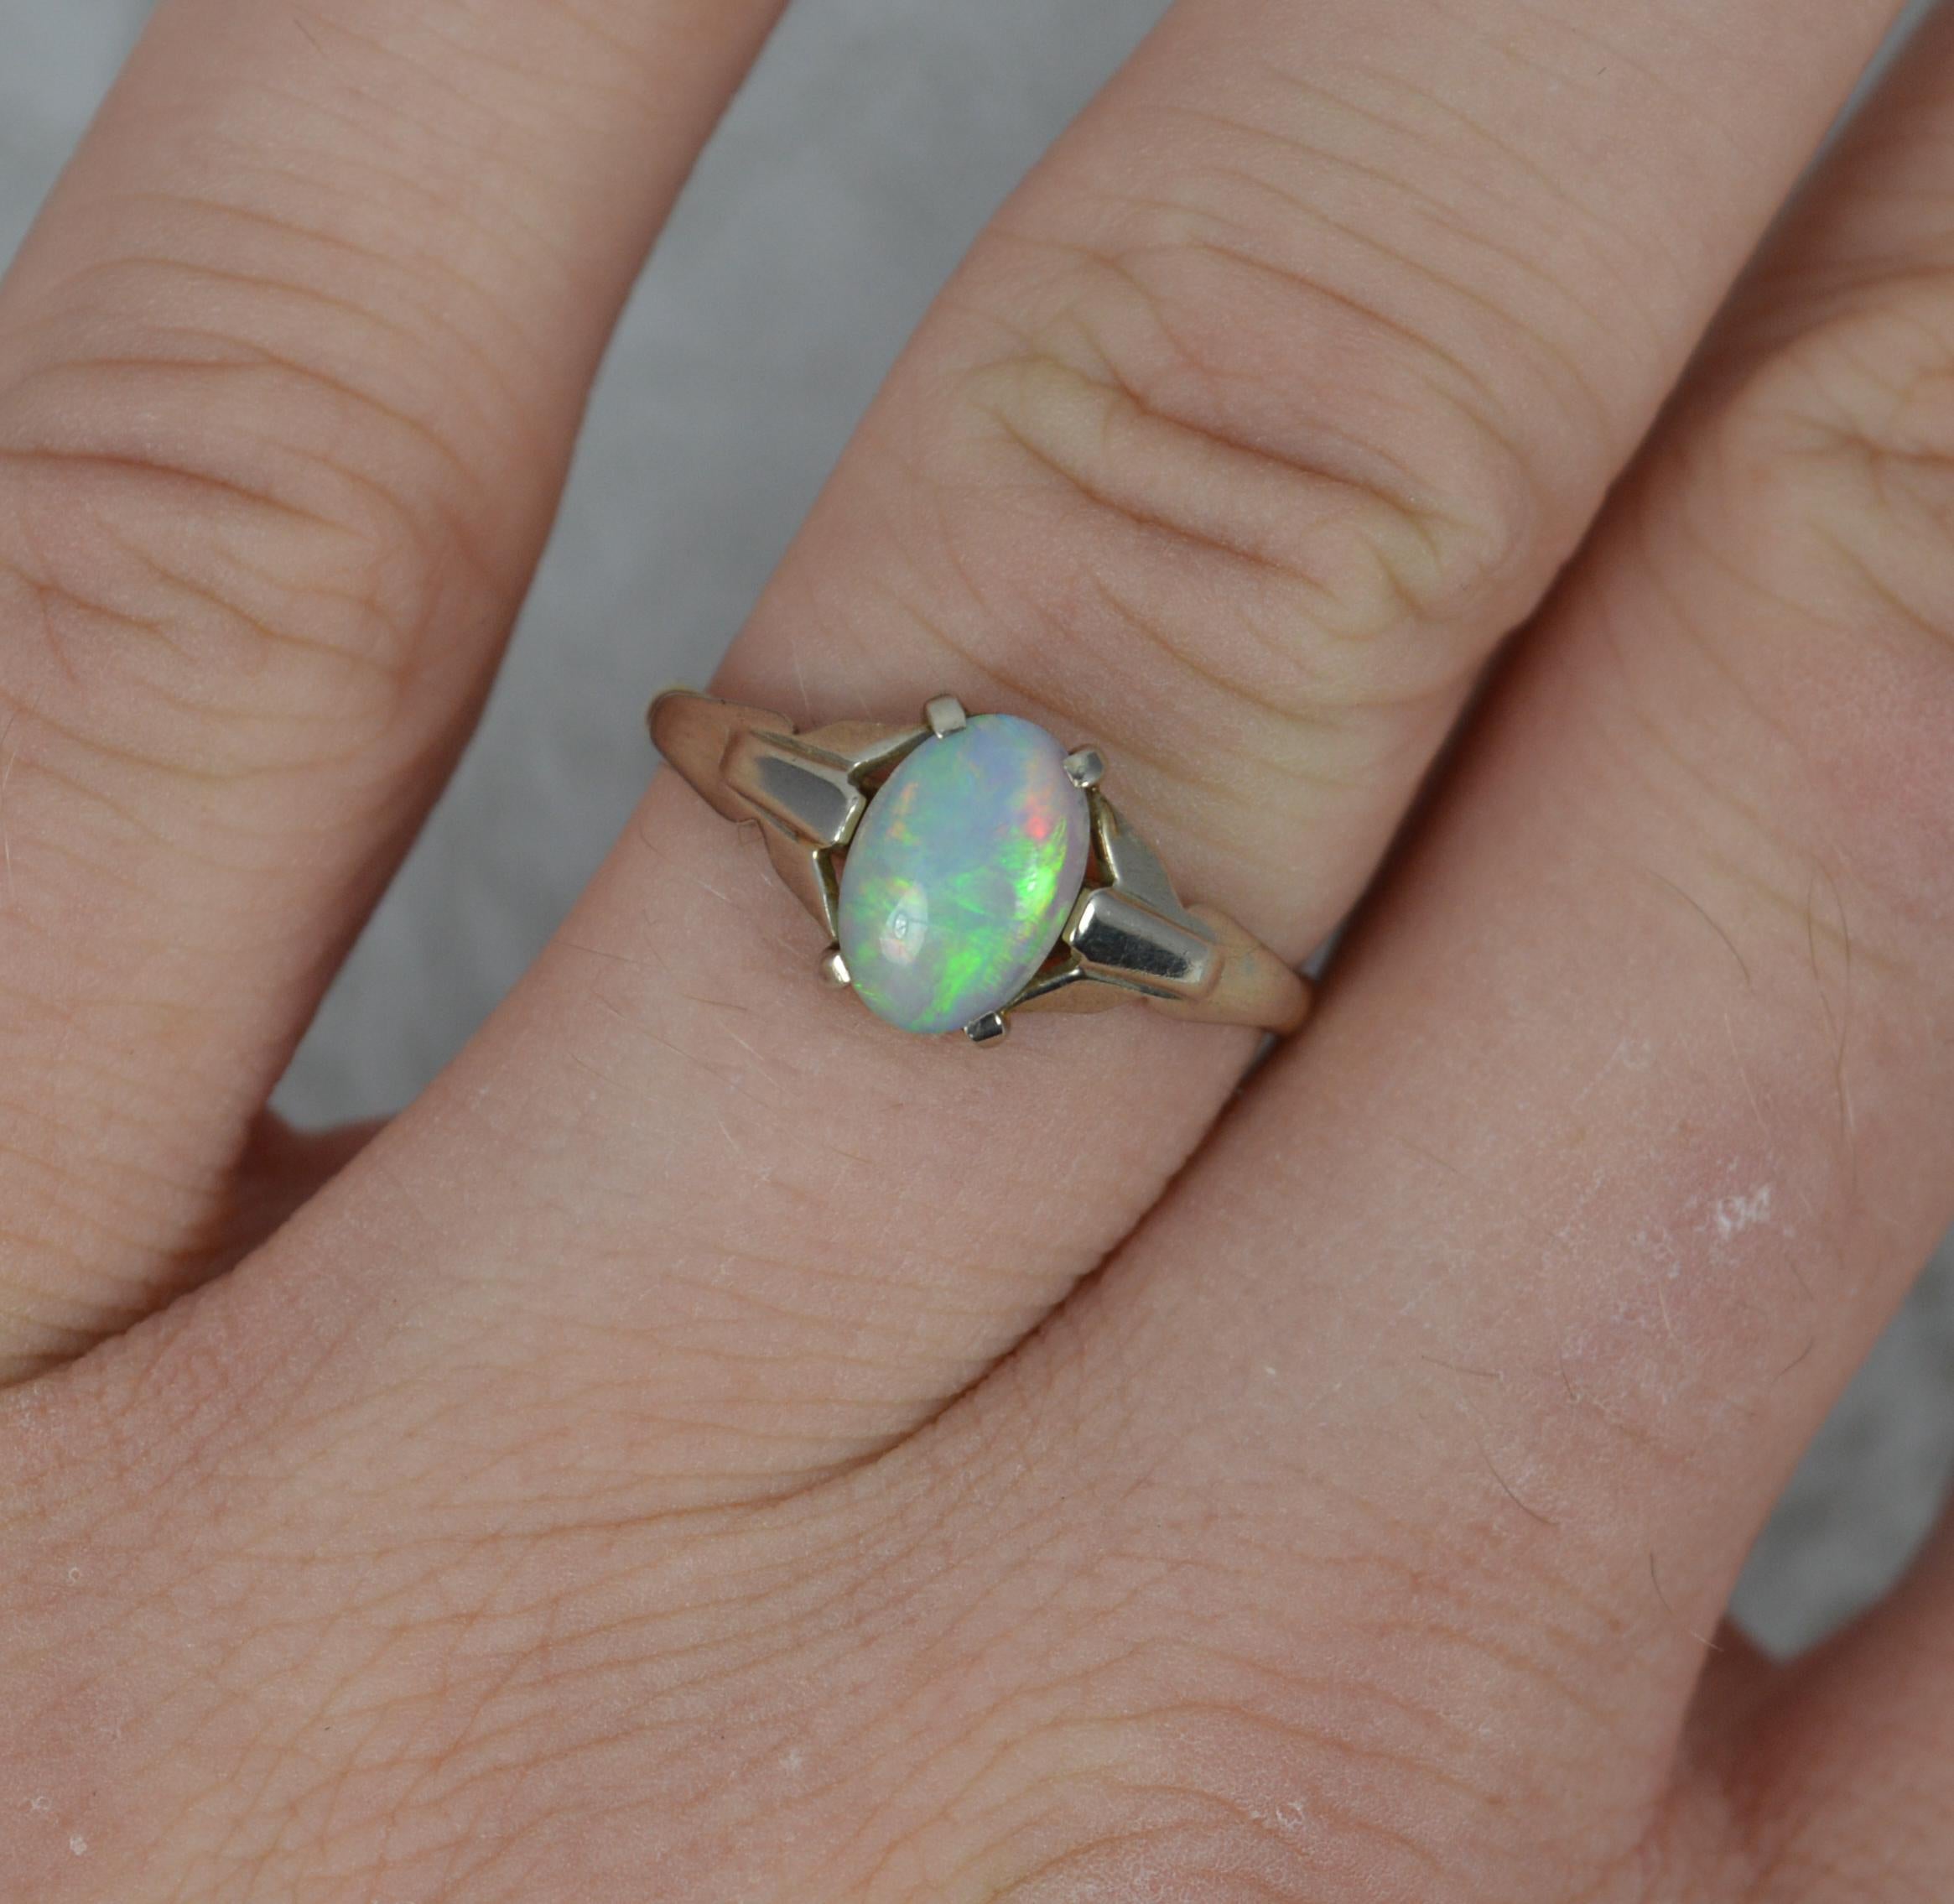 An art deco ring.
Solid 9 carat gold example.
Natural opal, flashes of all colours.

Size O 1/2 UK, 7 1/2 US. Sizeable. 1.7 Grams. 5.7mm x 8.2mm approx. Set into a fine white gold or platinum setting. 

Very good for age. Clean, solid band, issue